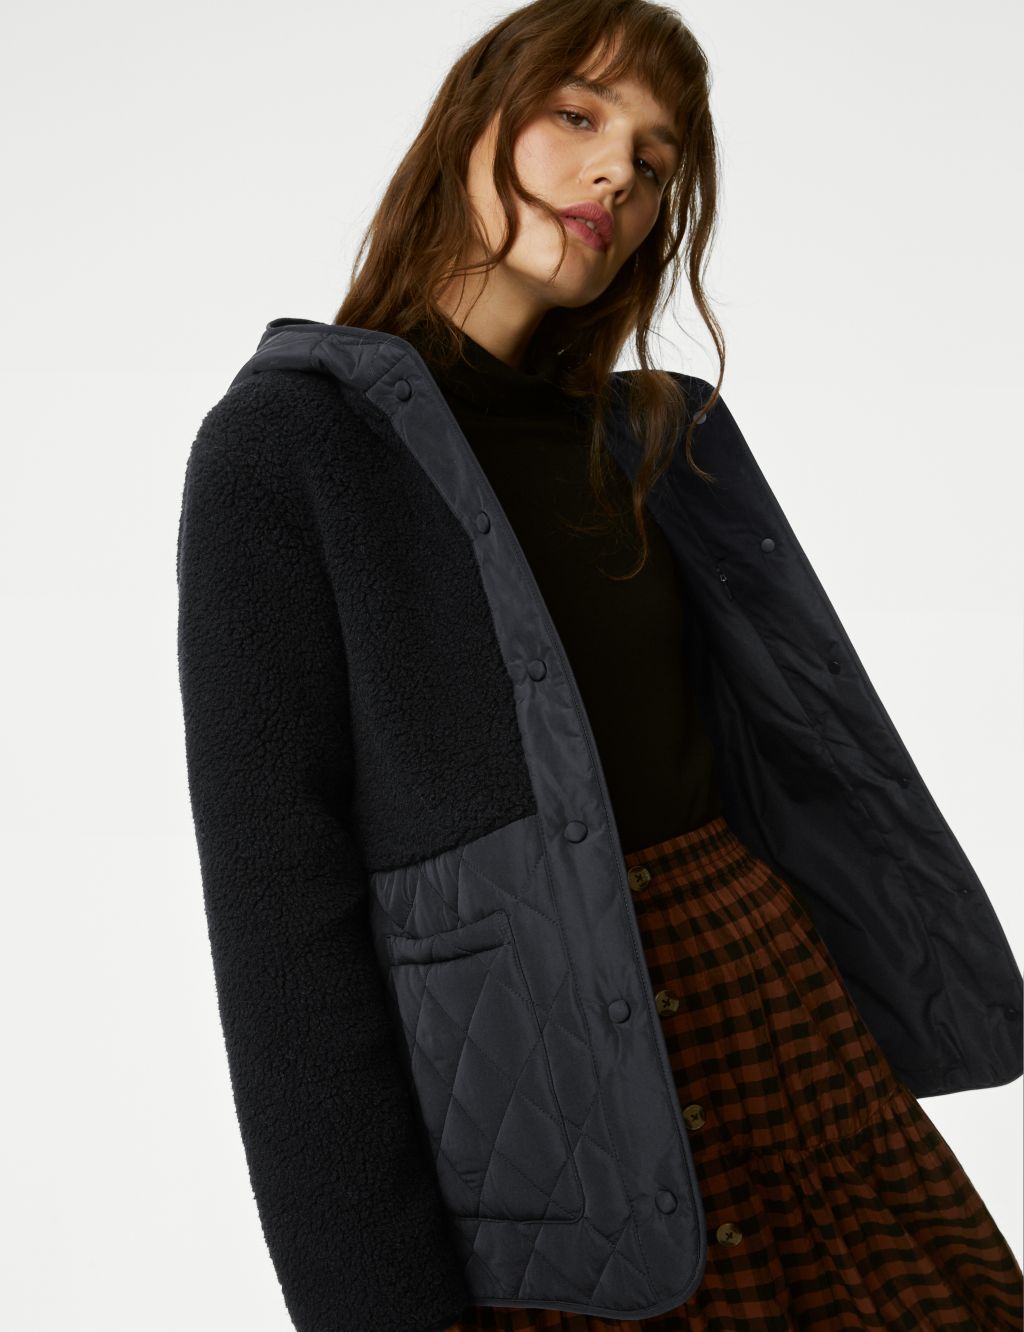 Page 2 - Women’s Coats & Jackets | M&S